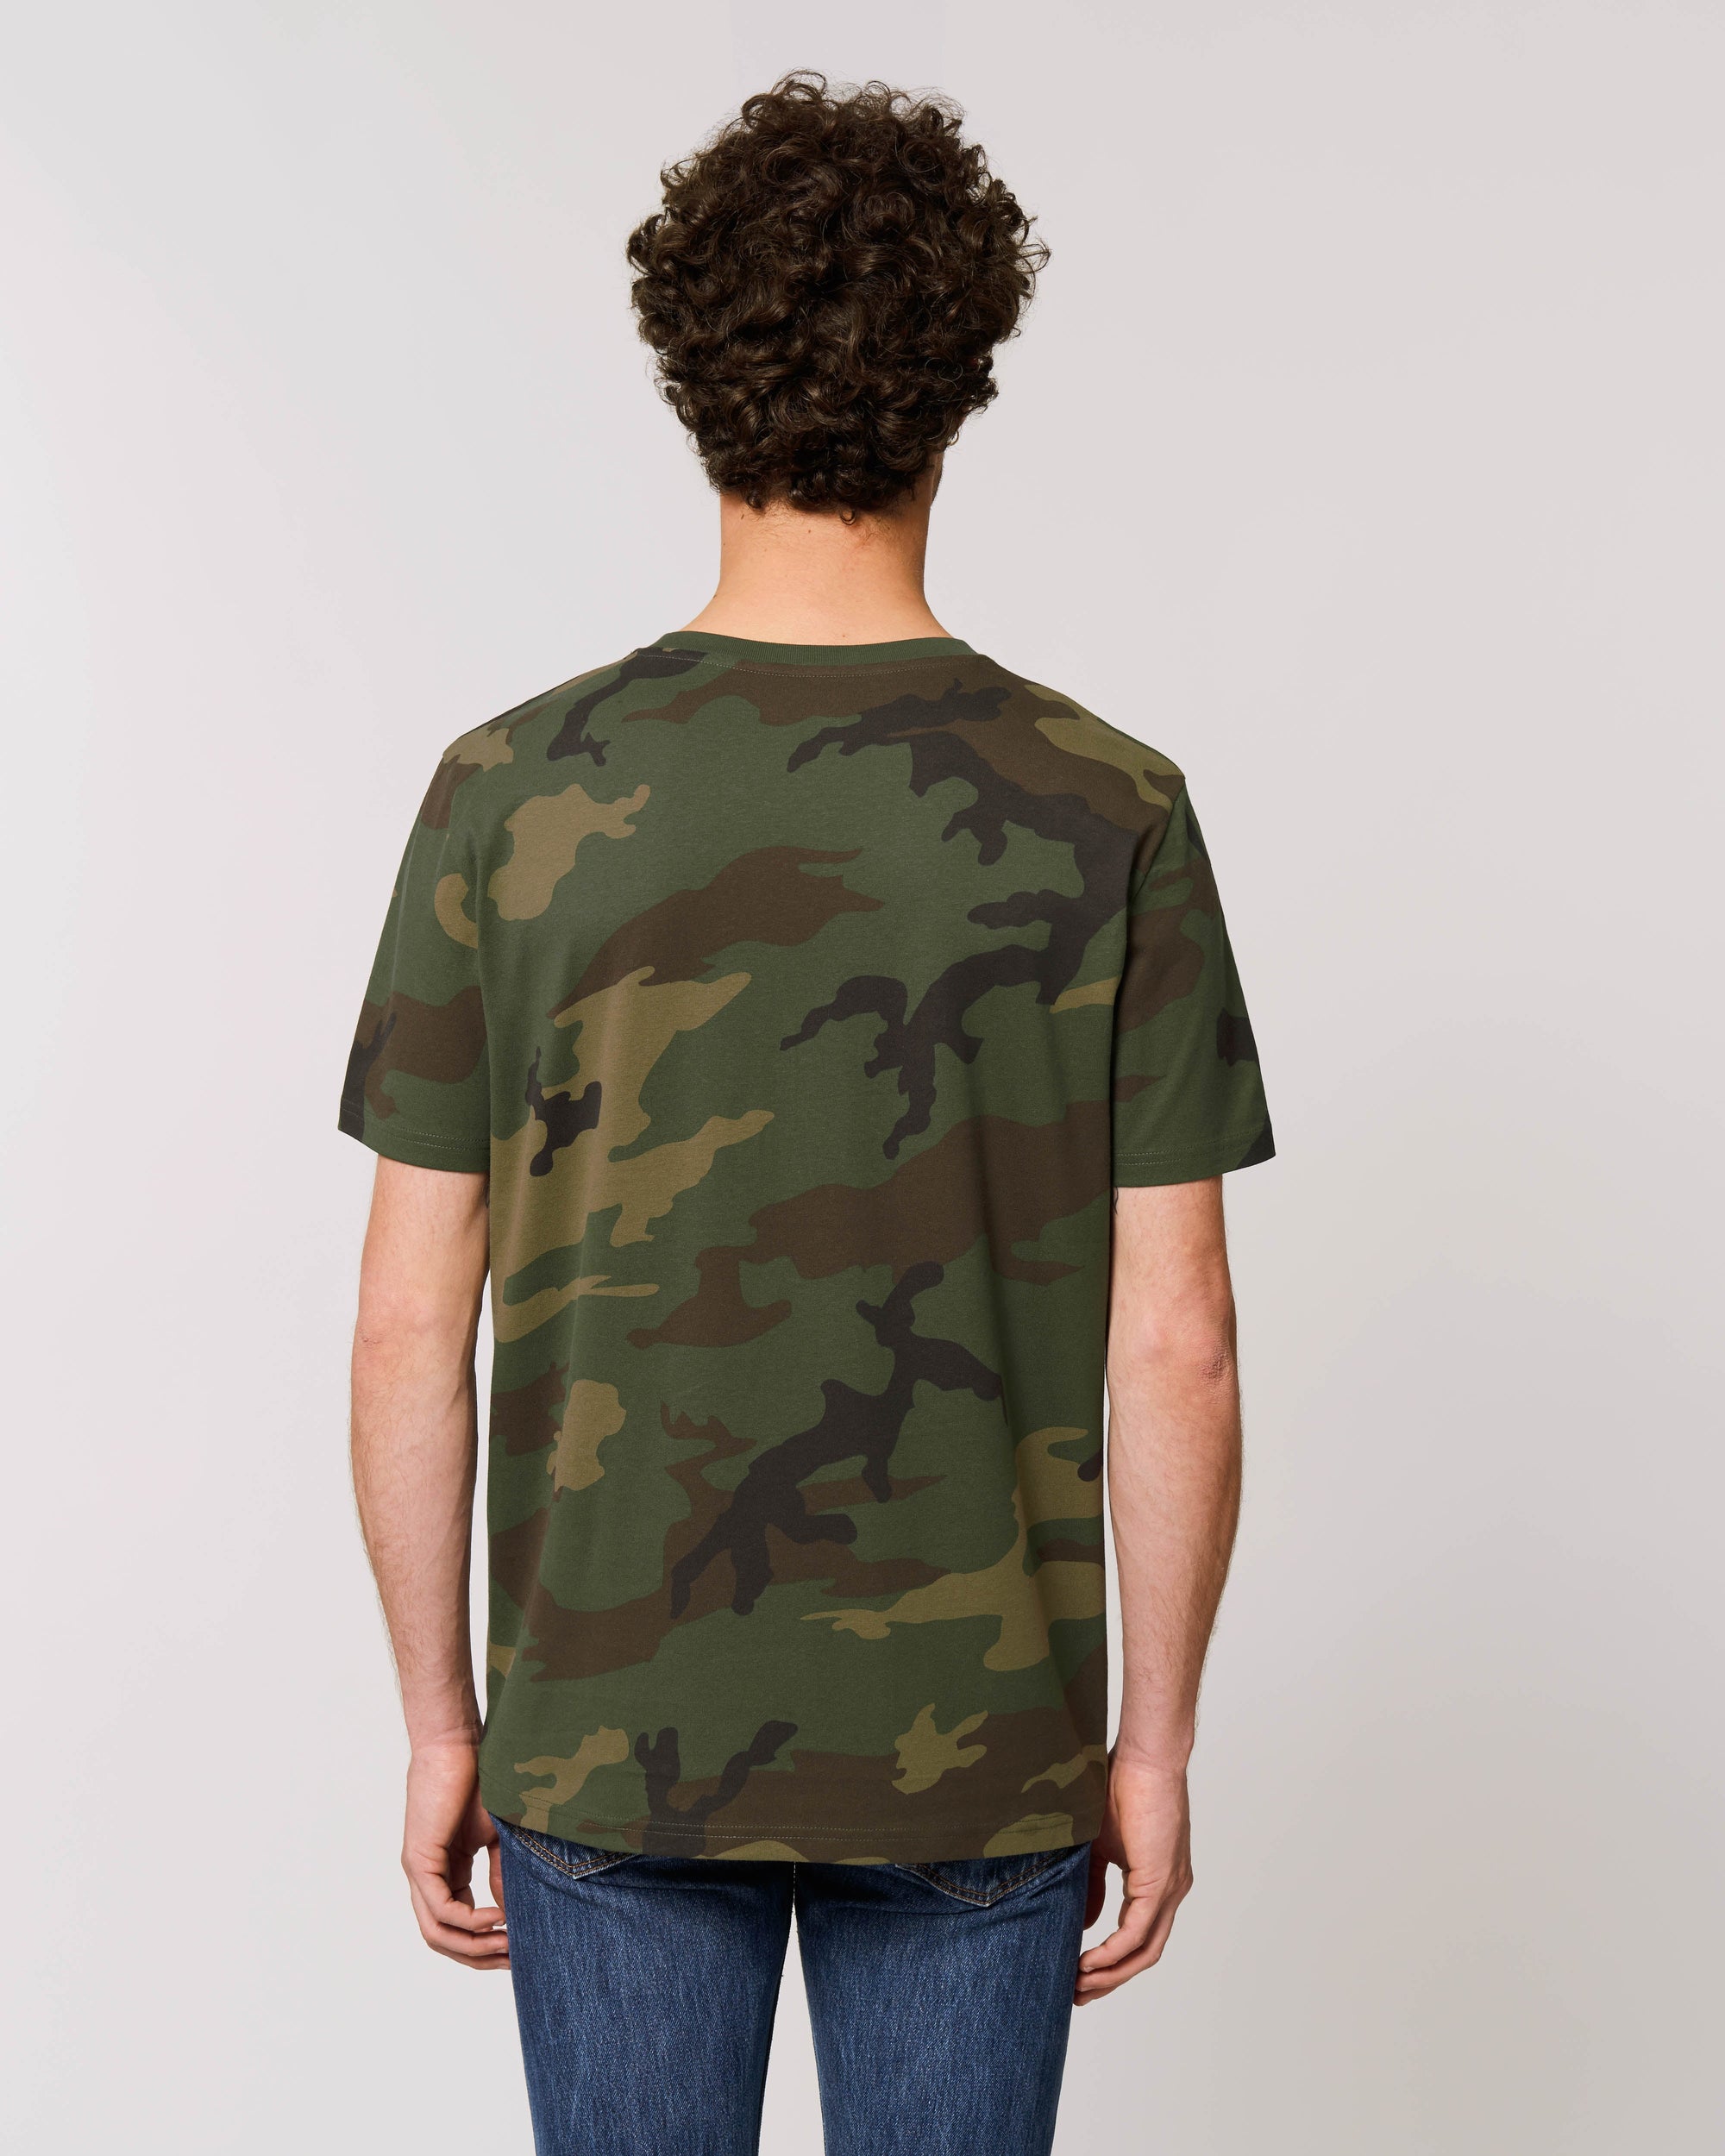 SAMPLE SALE 'LUST FOR LIFE' EMBROIDERED UNISEX CAMO PRINT ORGANIC COTTON T-SHIRT (SIZE XS)